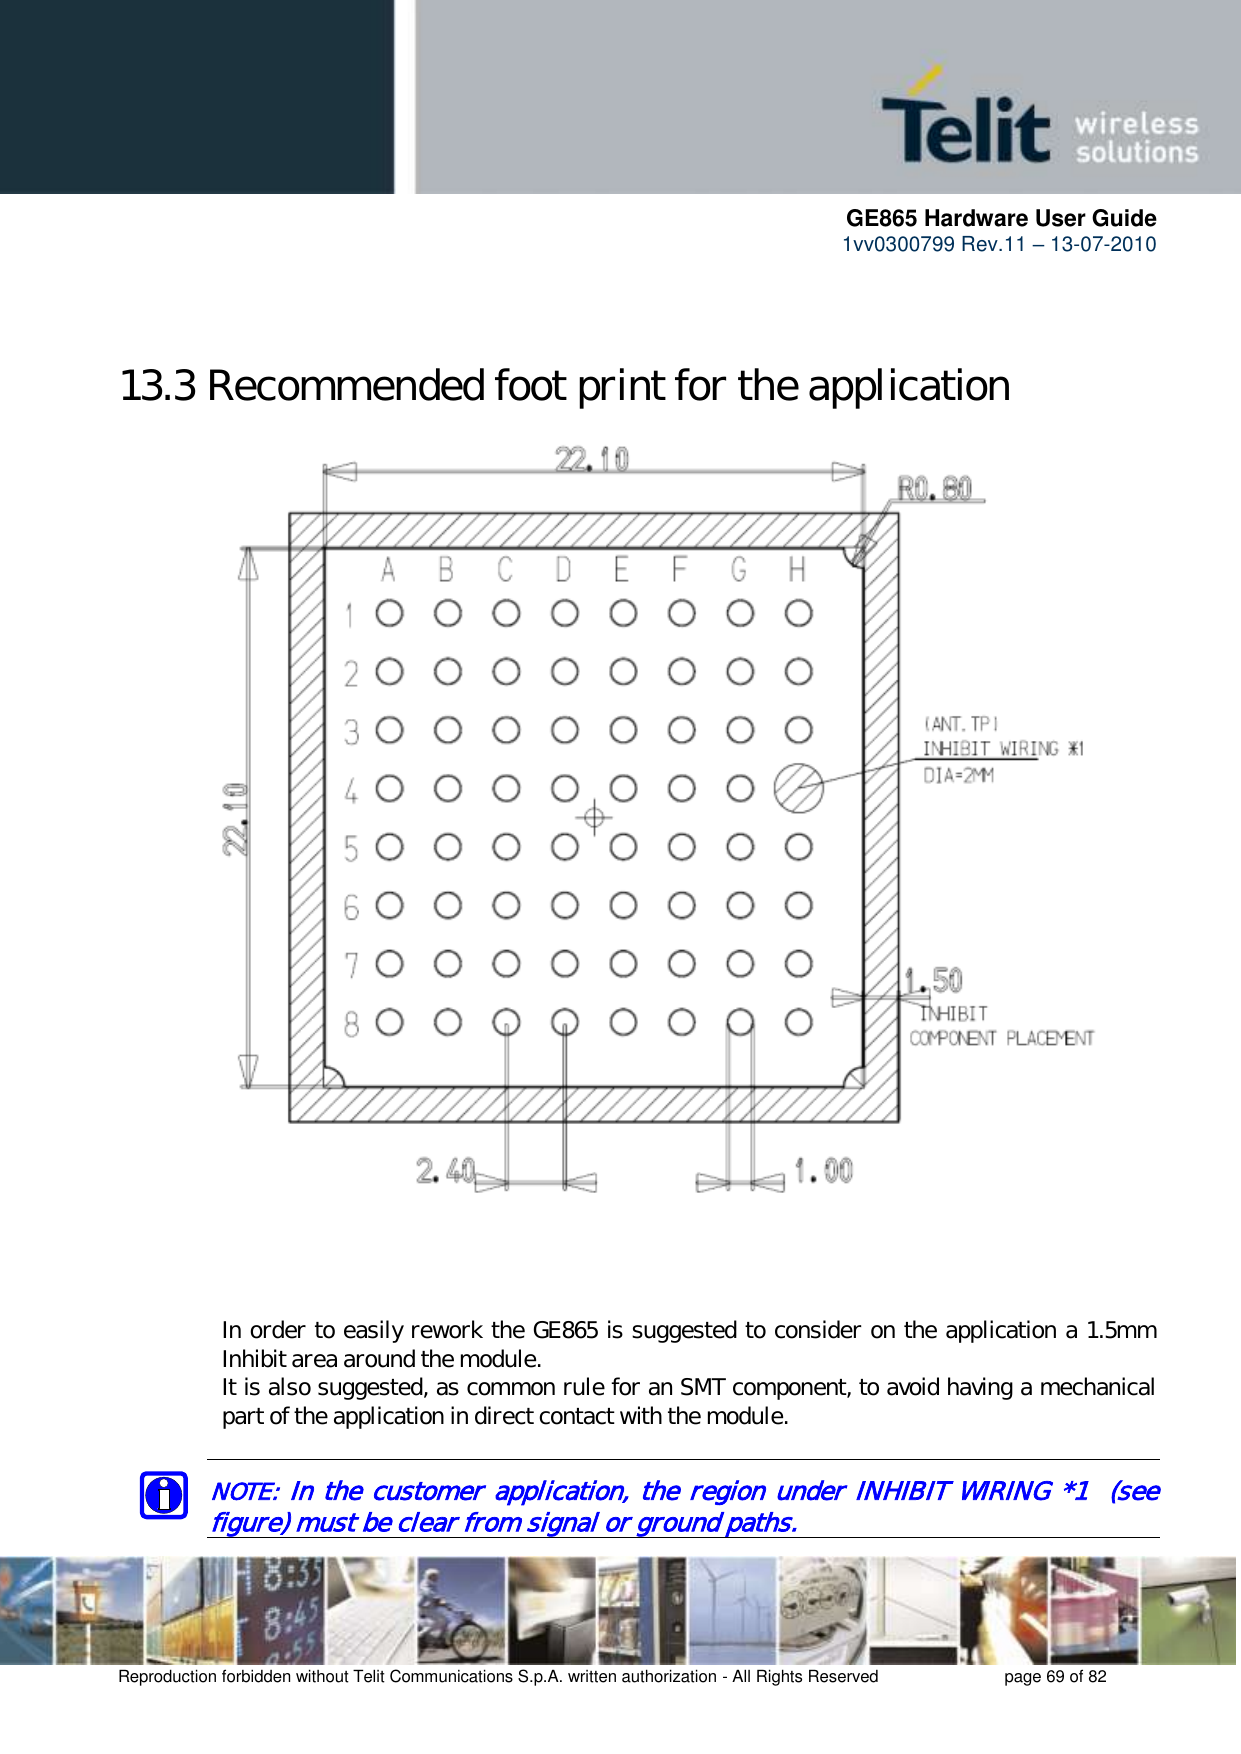      GE865 Hardware User Guide 1vv0300799 Rev.11 – 13-07-2010       Reproduction forbidden without Telit Communications S.p.A. written authorization - All Rights Reserved    page 69 of 82   13.3 Recommended foot print for the application                                In order to easily rework the GE865 is suggested to consider on the application a 1.5mm Inhibit area around the module. It is also suggested, as common rule for an SMT component, to avoid having a mechanical part of the application in direct contact with the module.  NOTE: In the customer application, the region under INHIBIT WIRING *1  (see figure) must be clear from signal or ground paths. 